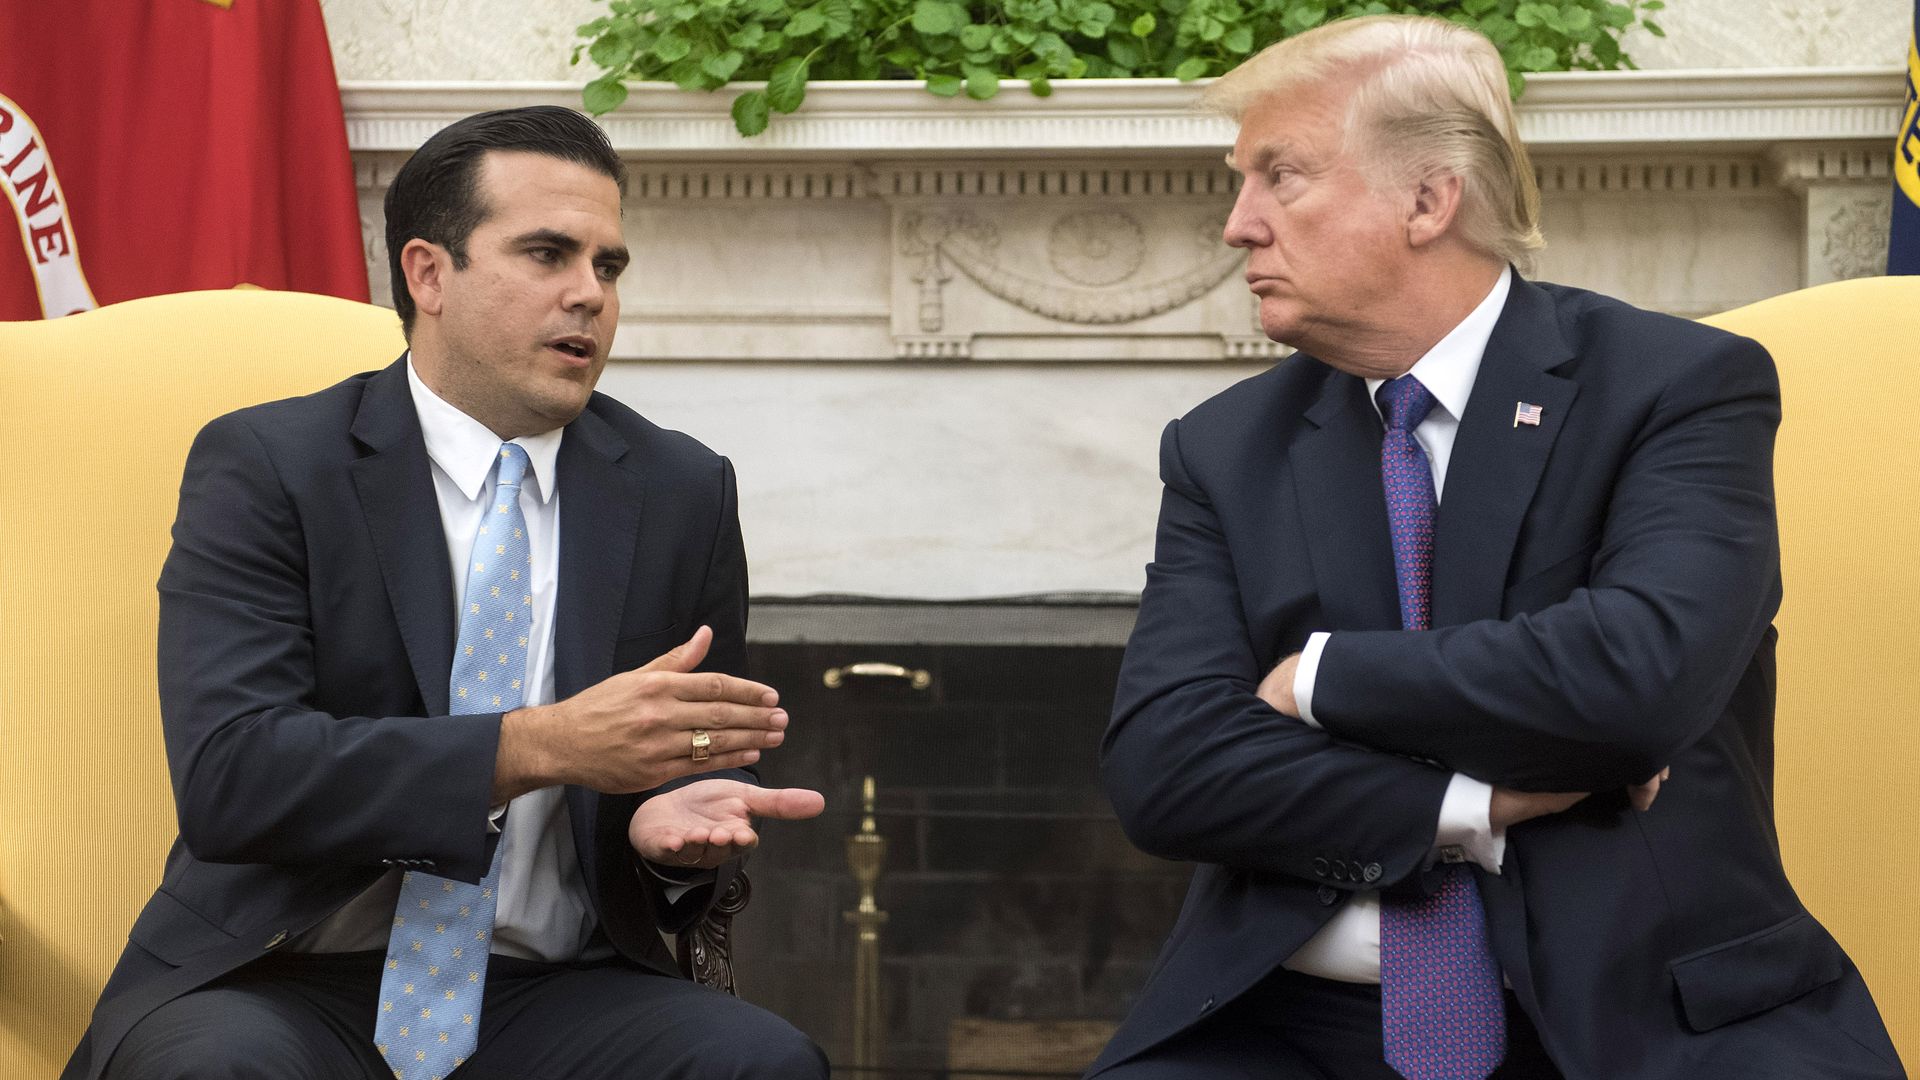 Ricardo Rosselló sits next to President Trump in the Oval Office. 